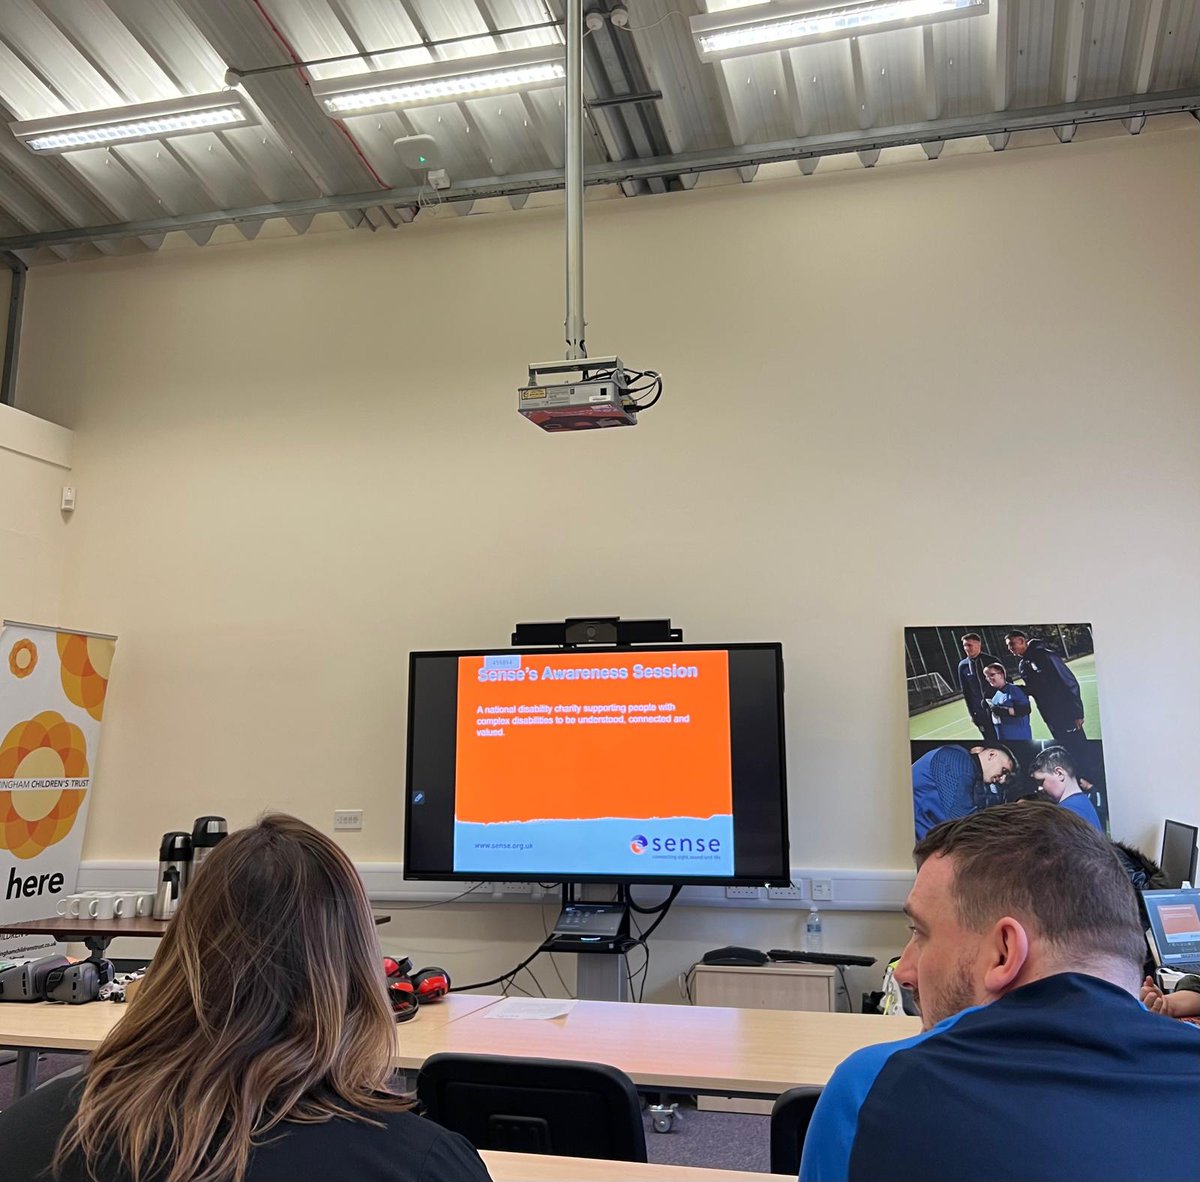 Yesterday Megan and Jack attended a Sense's Awareness Session delivered by @sensecharity and GEN 22! ❤️ Thank you so much for an amazing, insightful and educational morning! ❤️